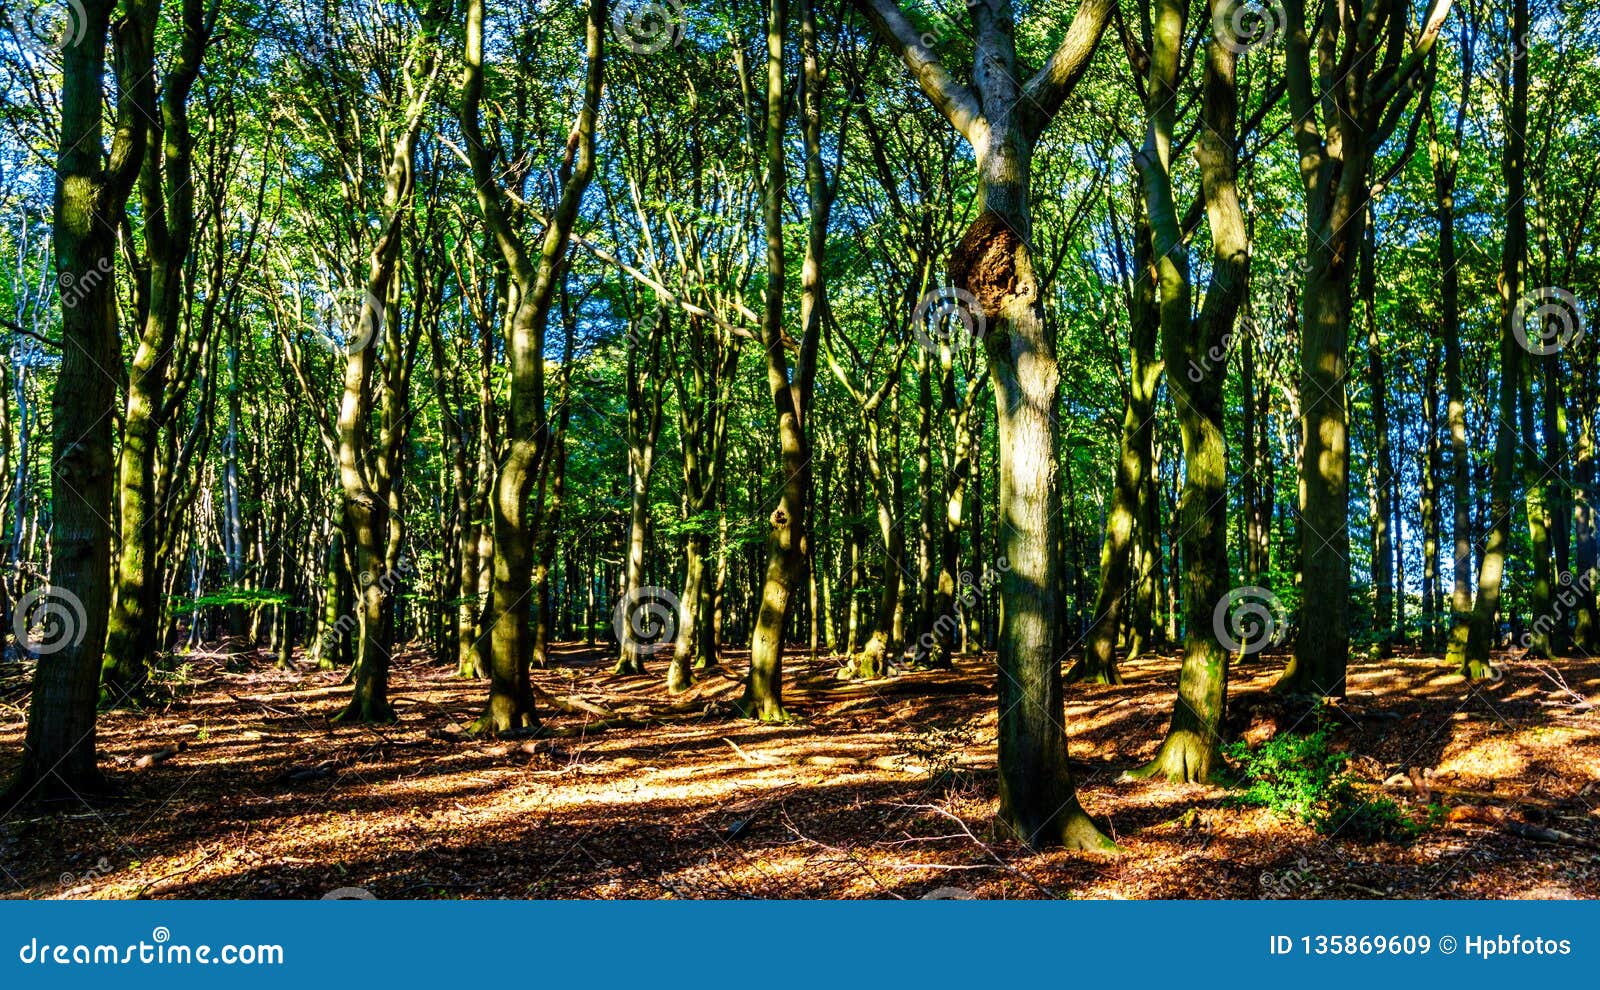 beautiful forests of the veluwe region in the netherlands